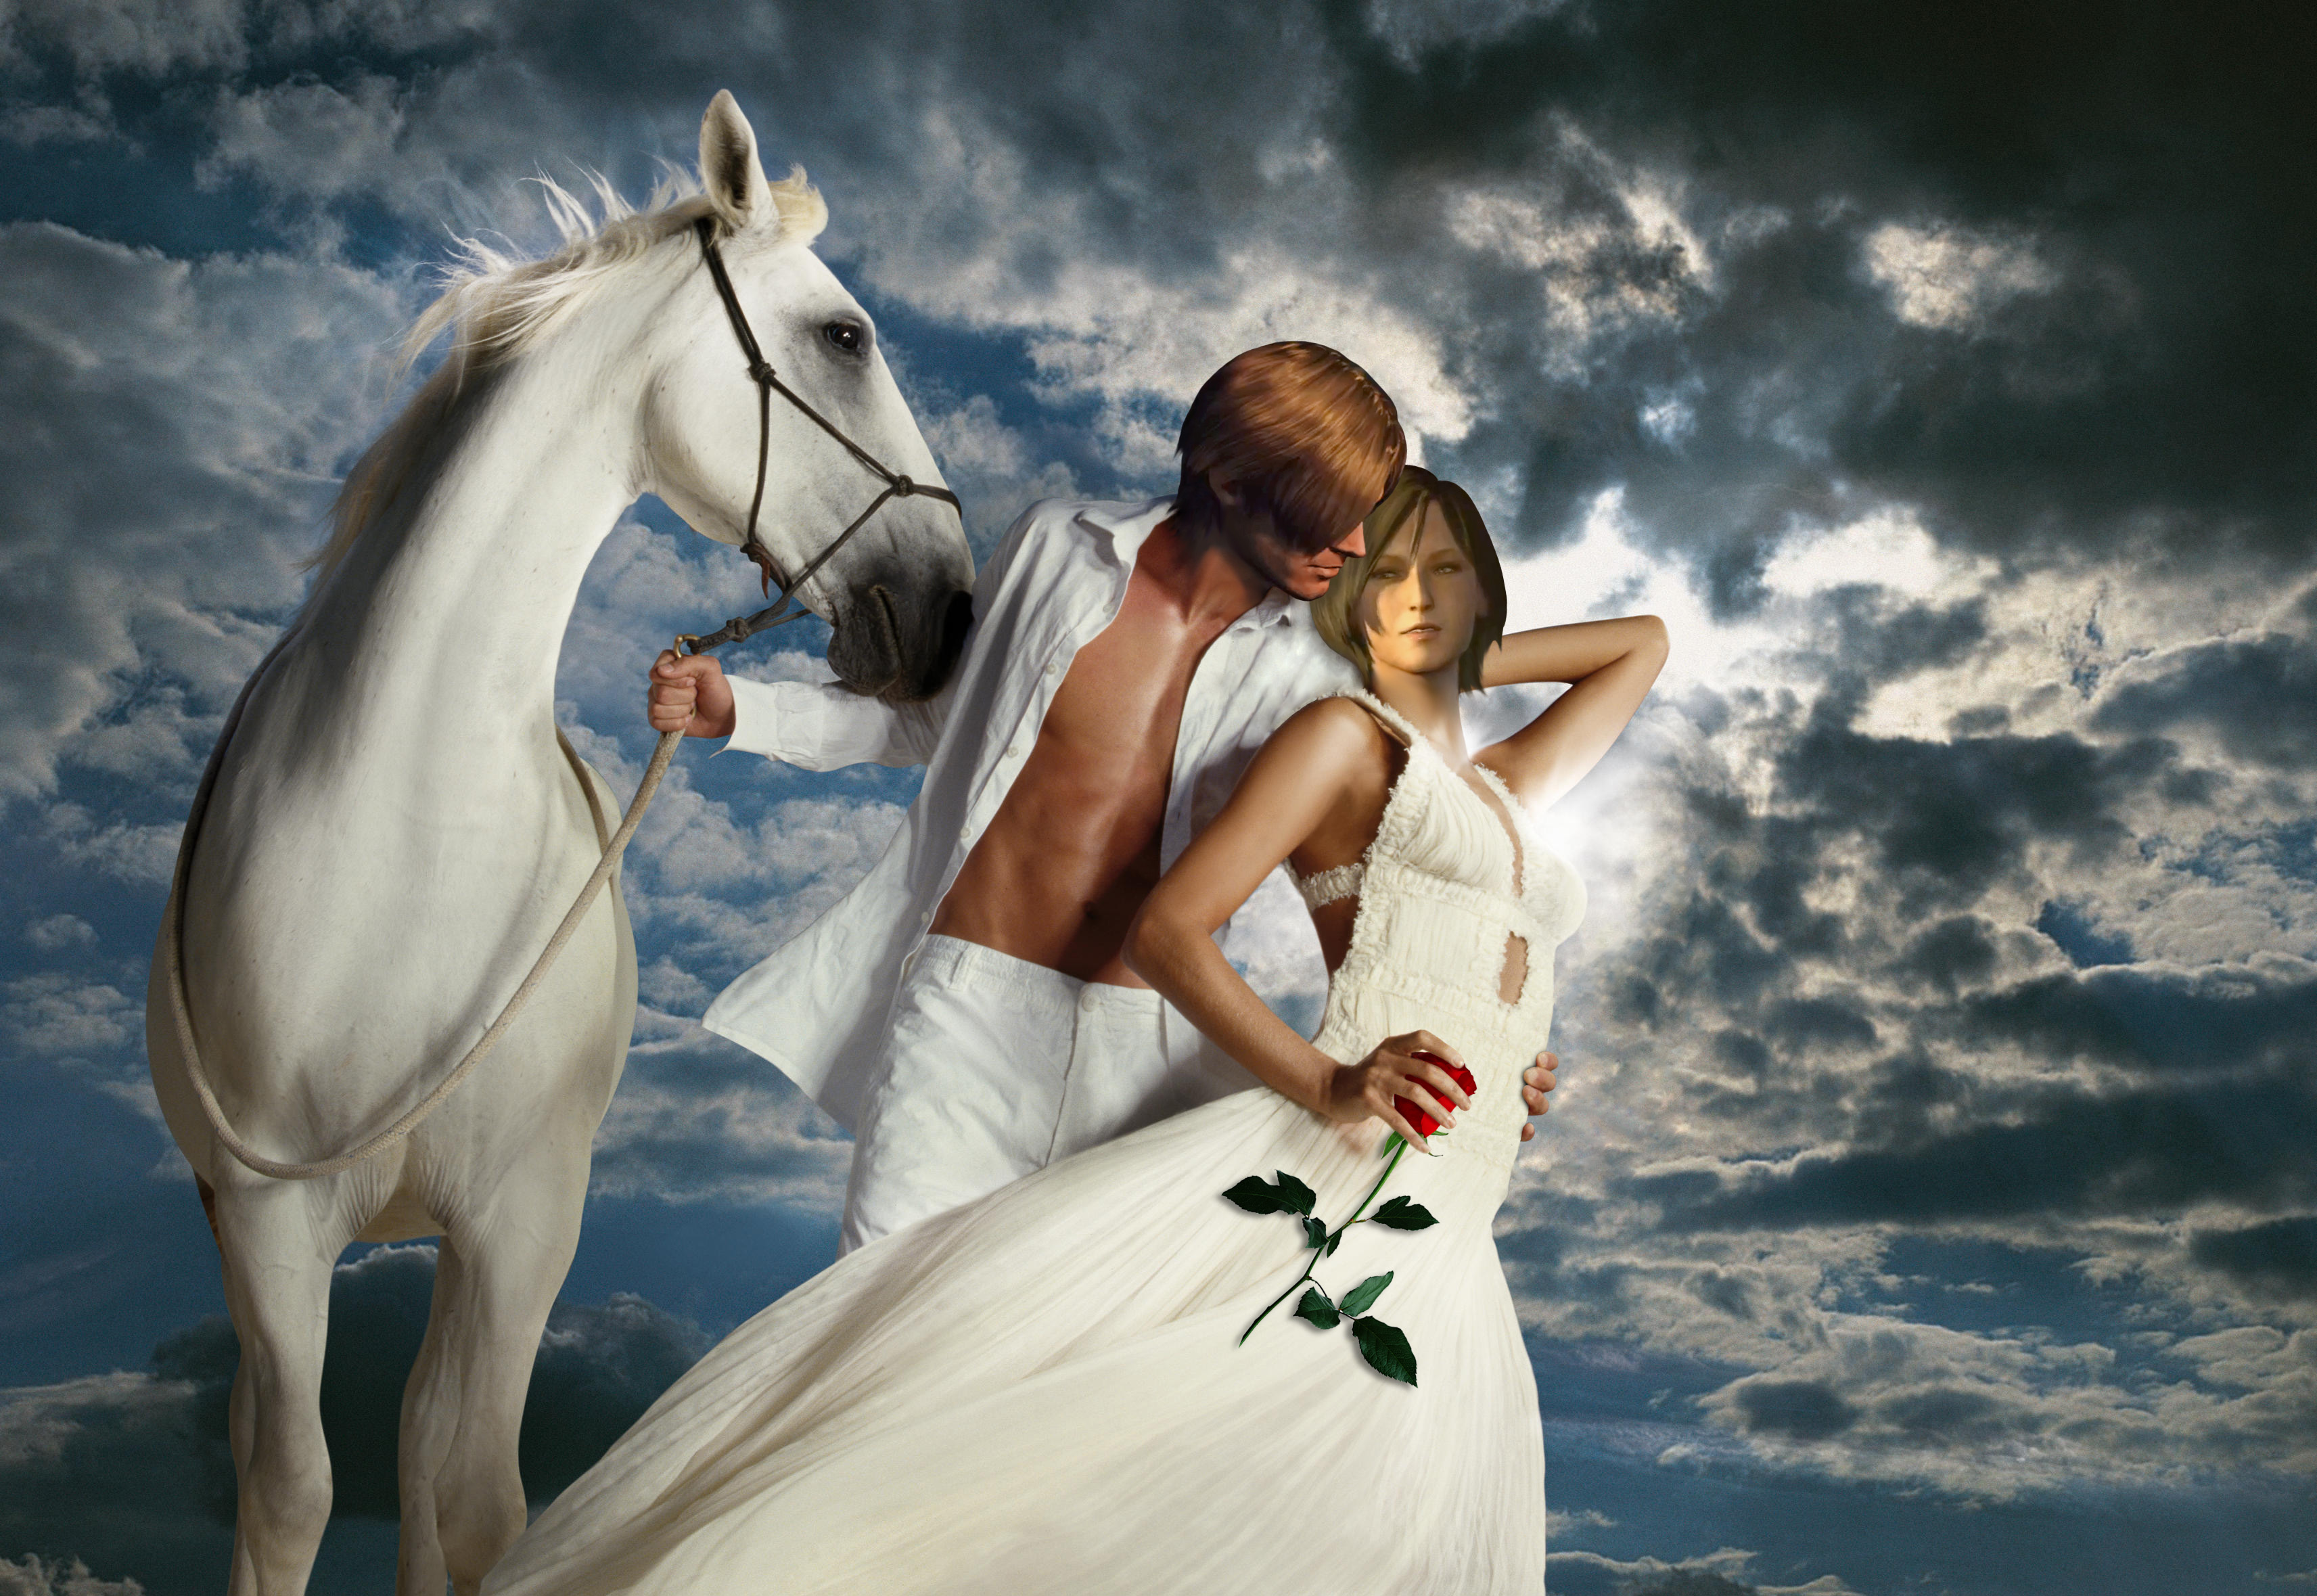 Prince on a white horse and his princess by Taitiii on DeviantArt